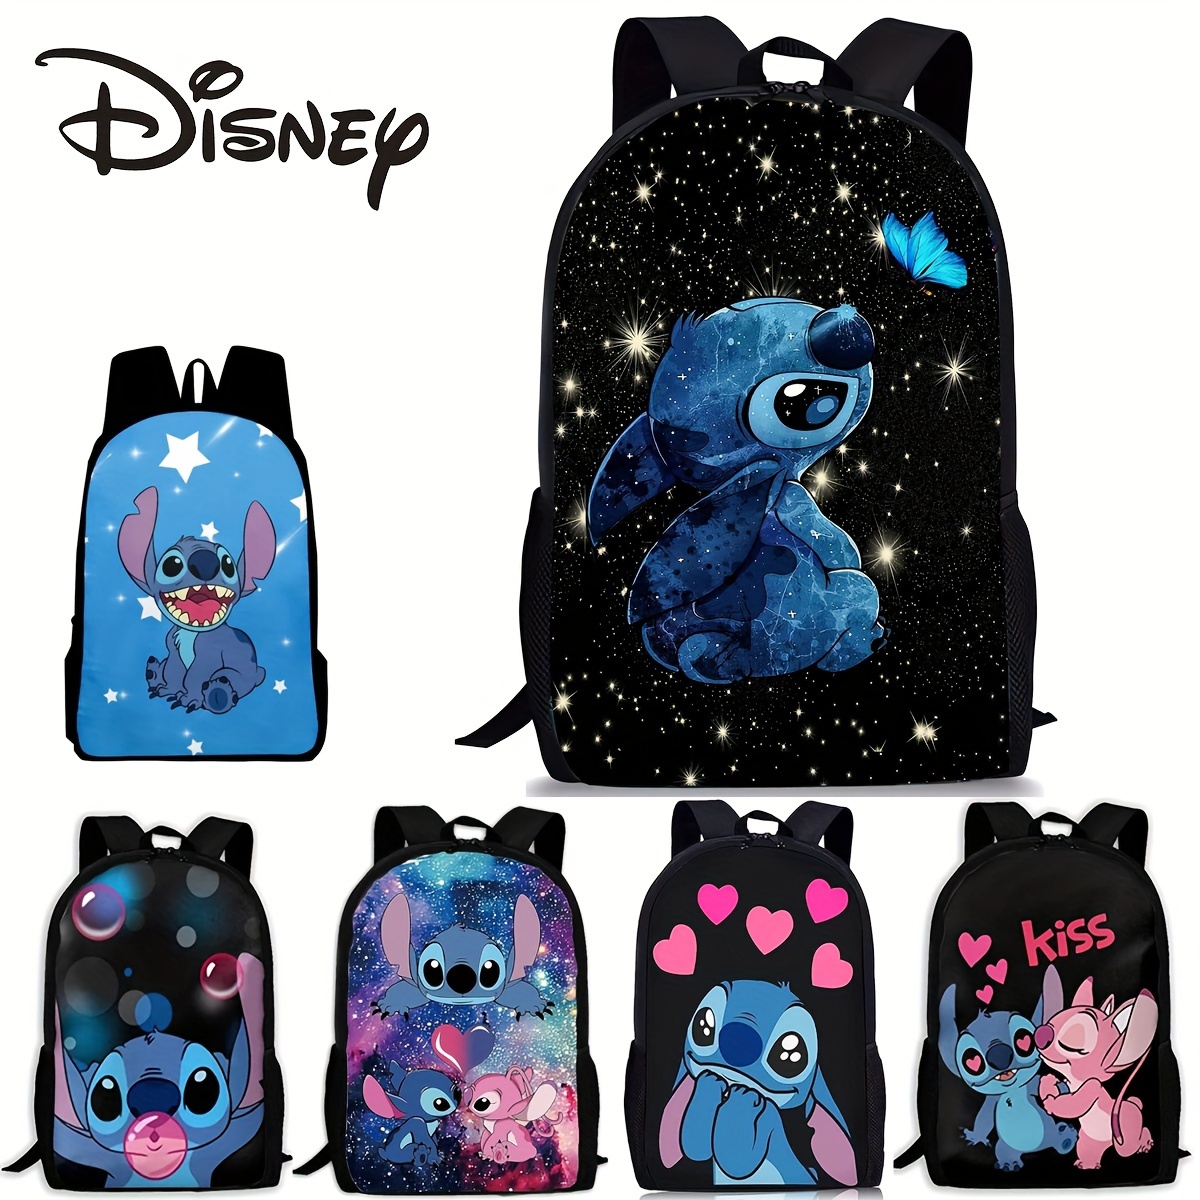 

Disney Stitch Backpack, Simple Casual Travel College School Bag, Cartoon Anime Cute Laptop Daypack